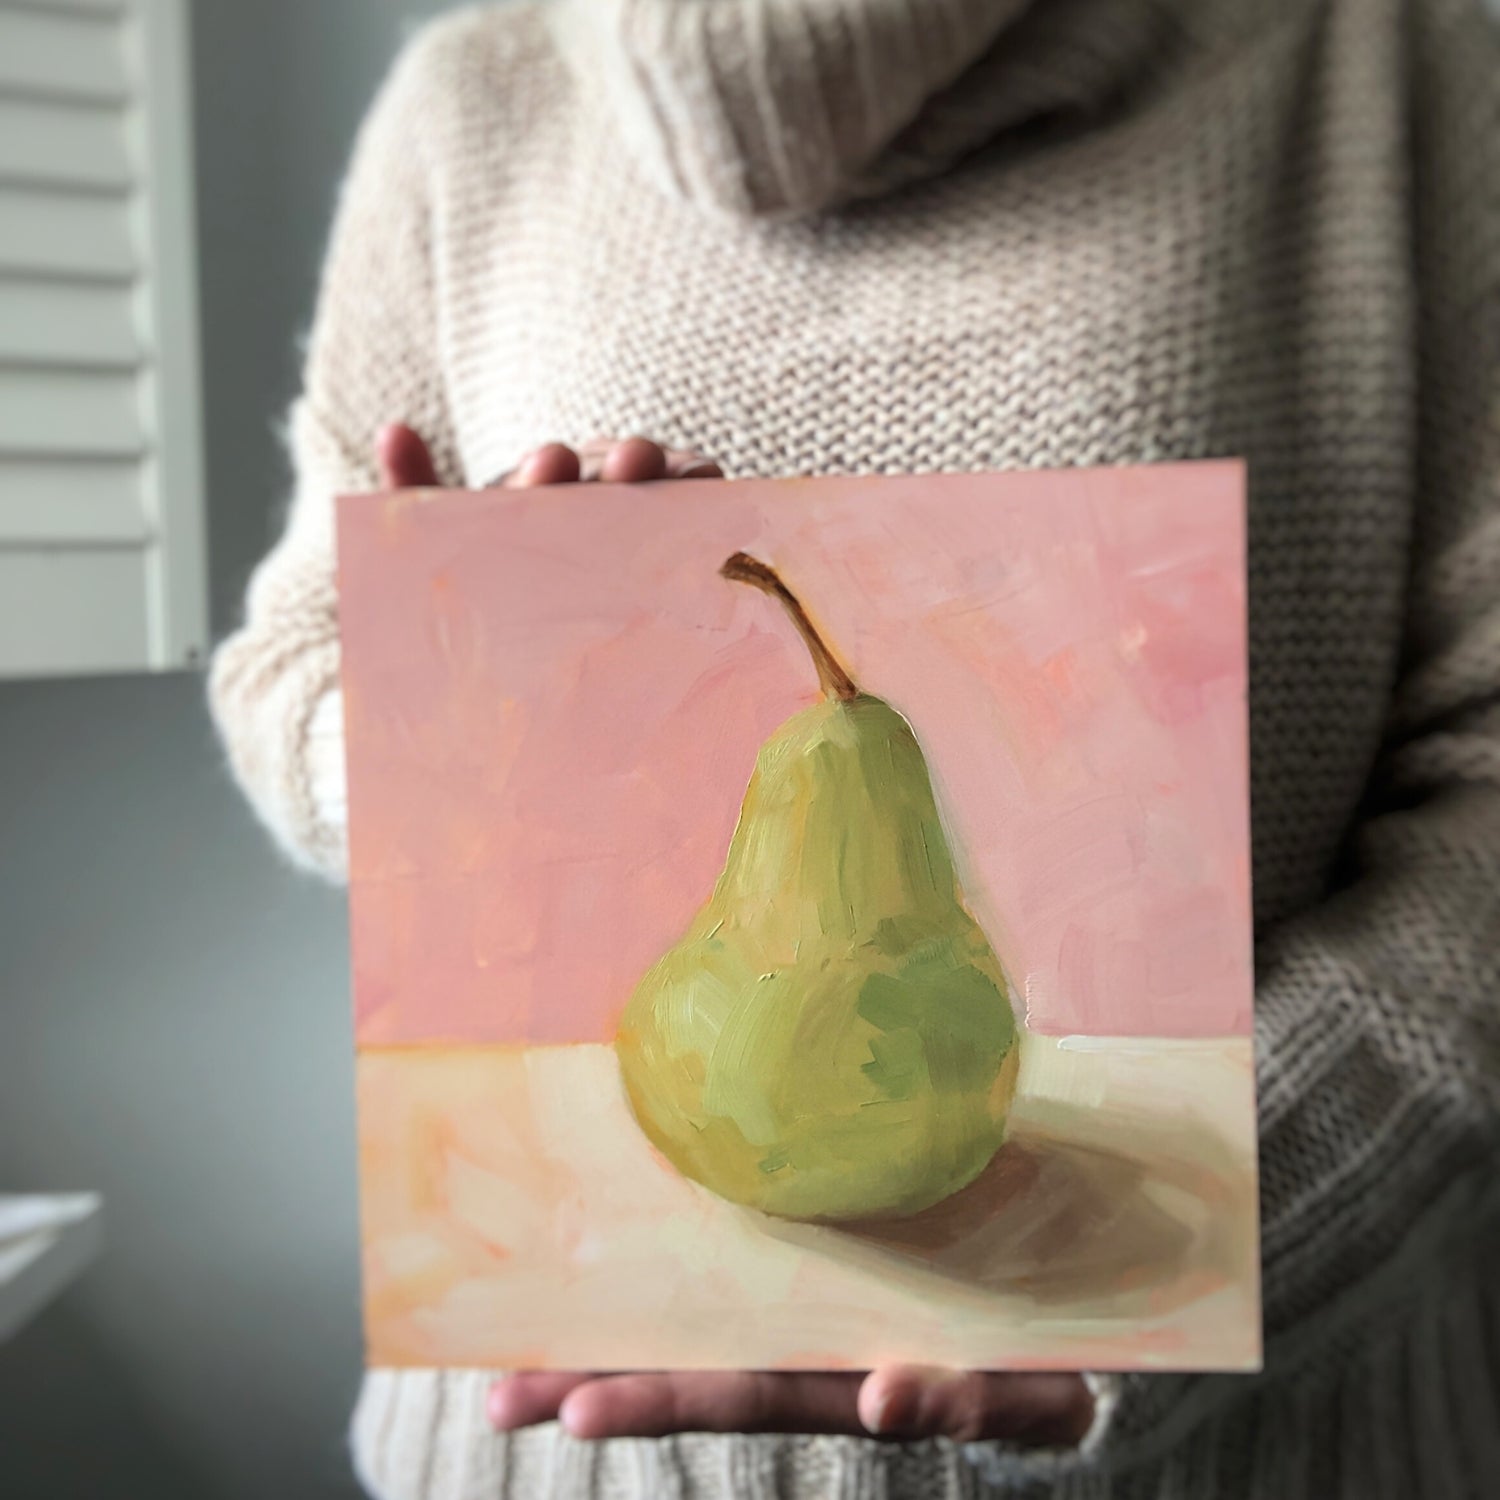 photo of a person holding an impressionistic and realistic original oil painting on board of a green pear sitting on a soft pink and cream background